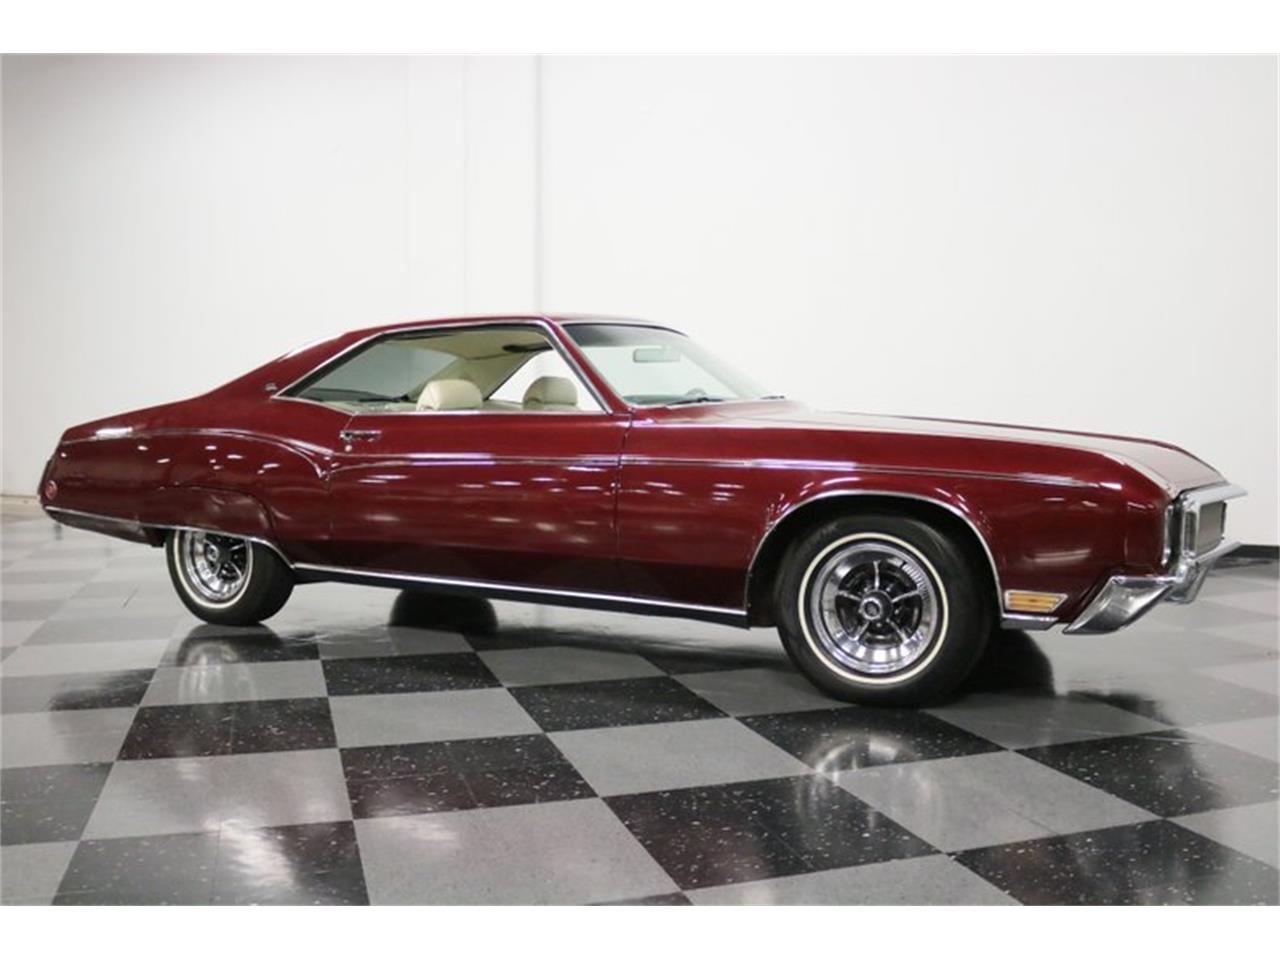 1970 buick riviera for sale classiccars com cc 1300737 1970 buick riviera for sale